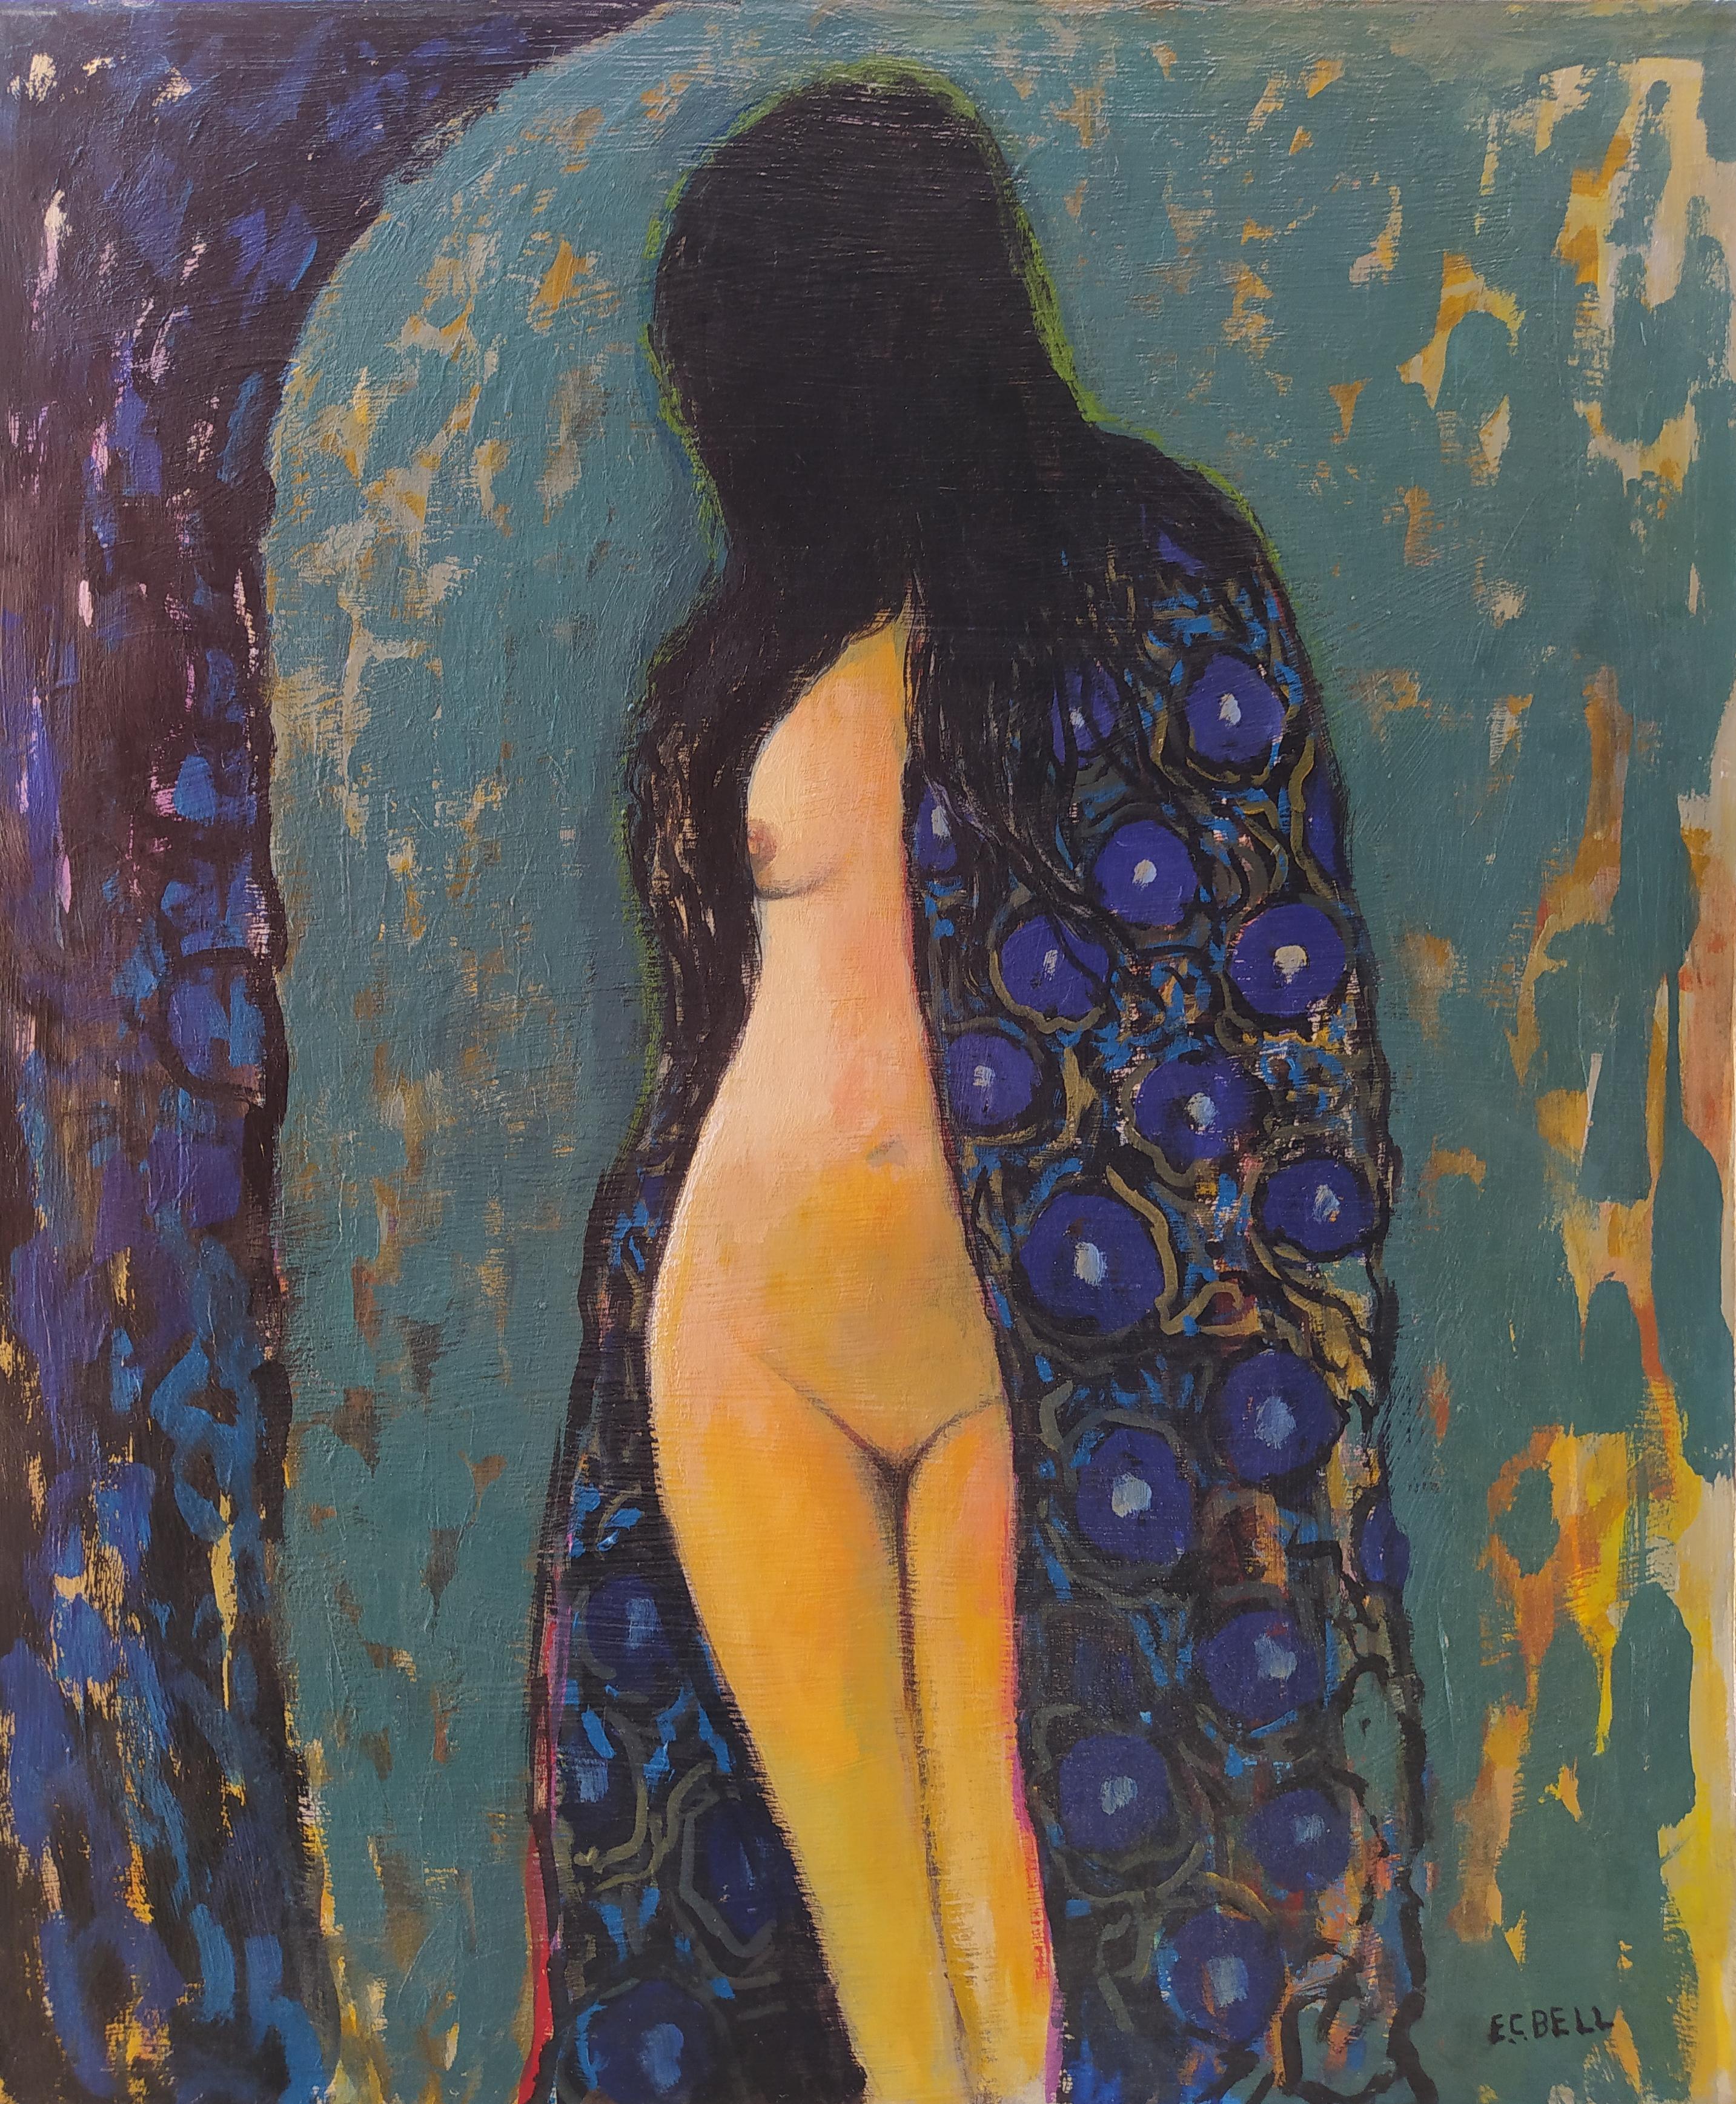 "Morning Glory Gown" - Vertical expressionist female semi-nude with gown.